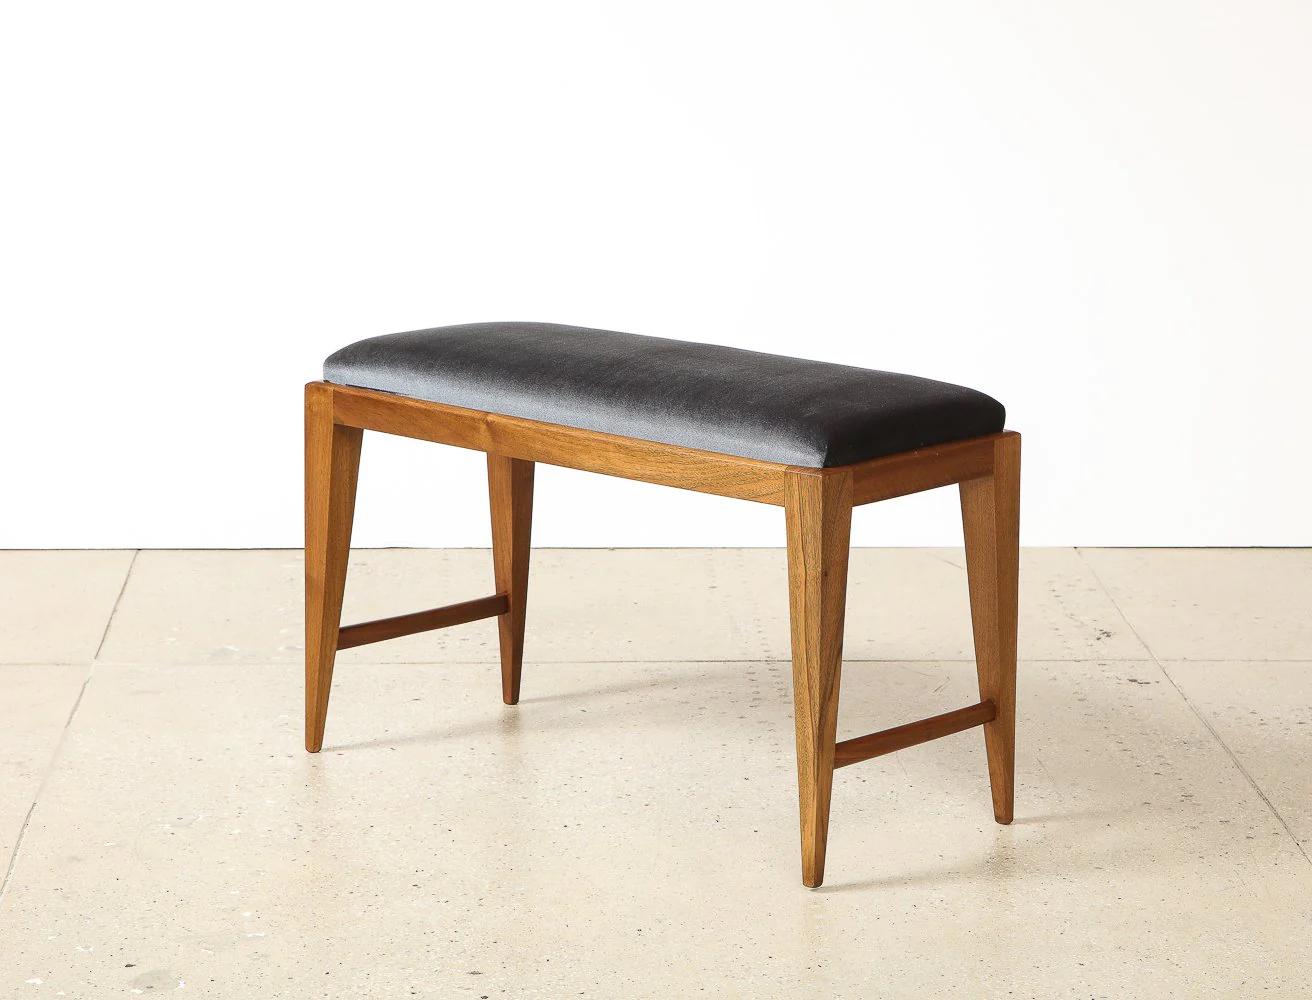 Hand-Crafted Upholstered Bench Attributed to Gio Ponti